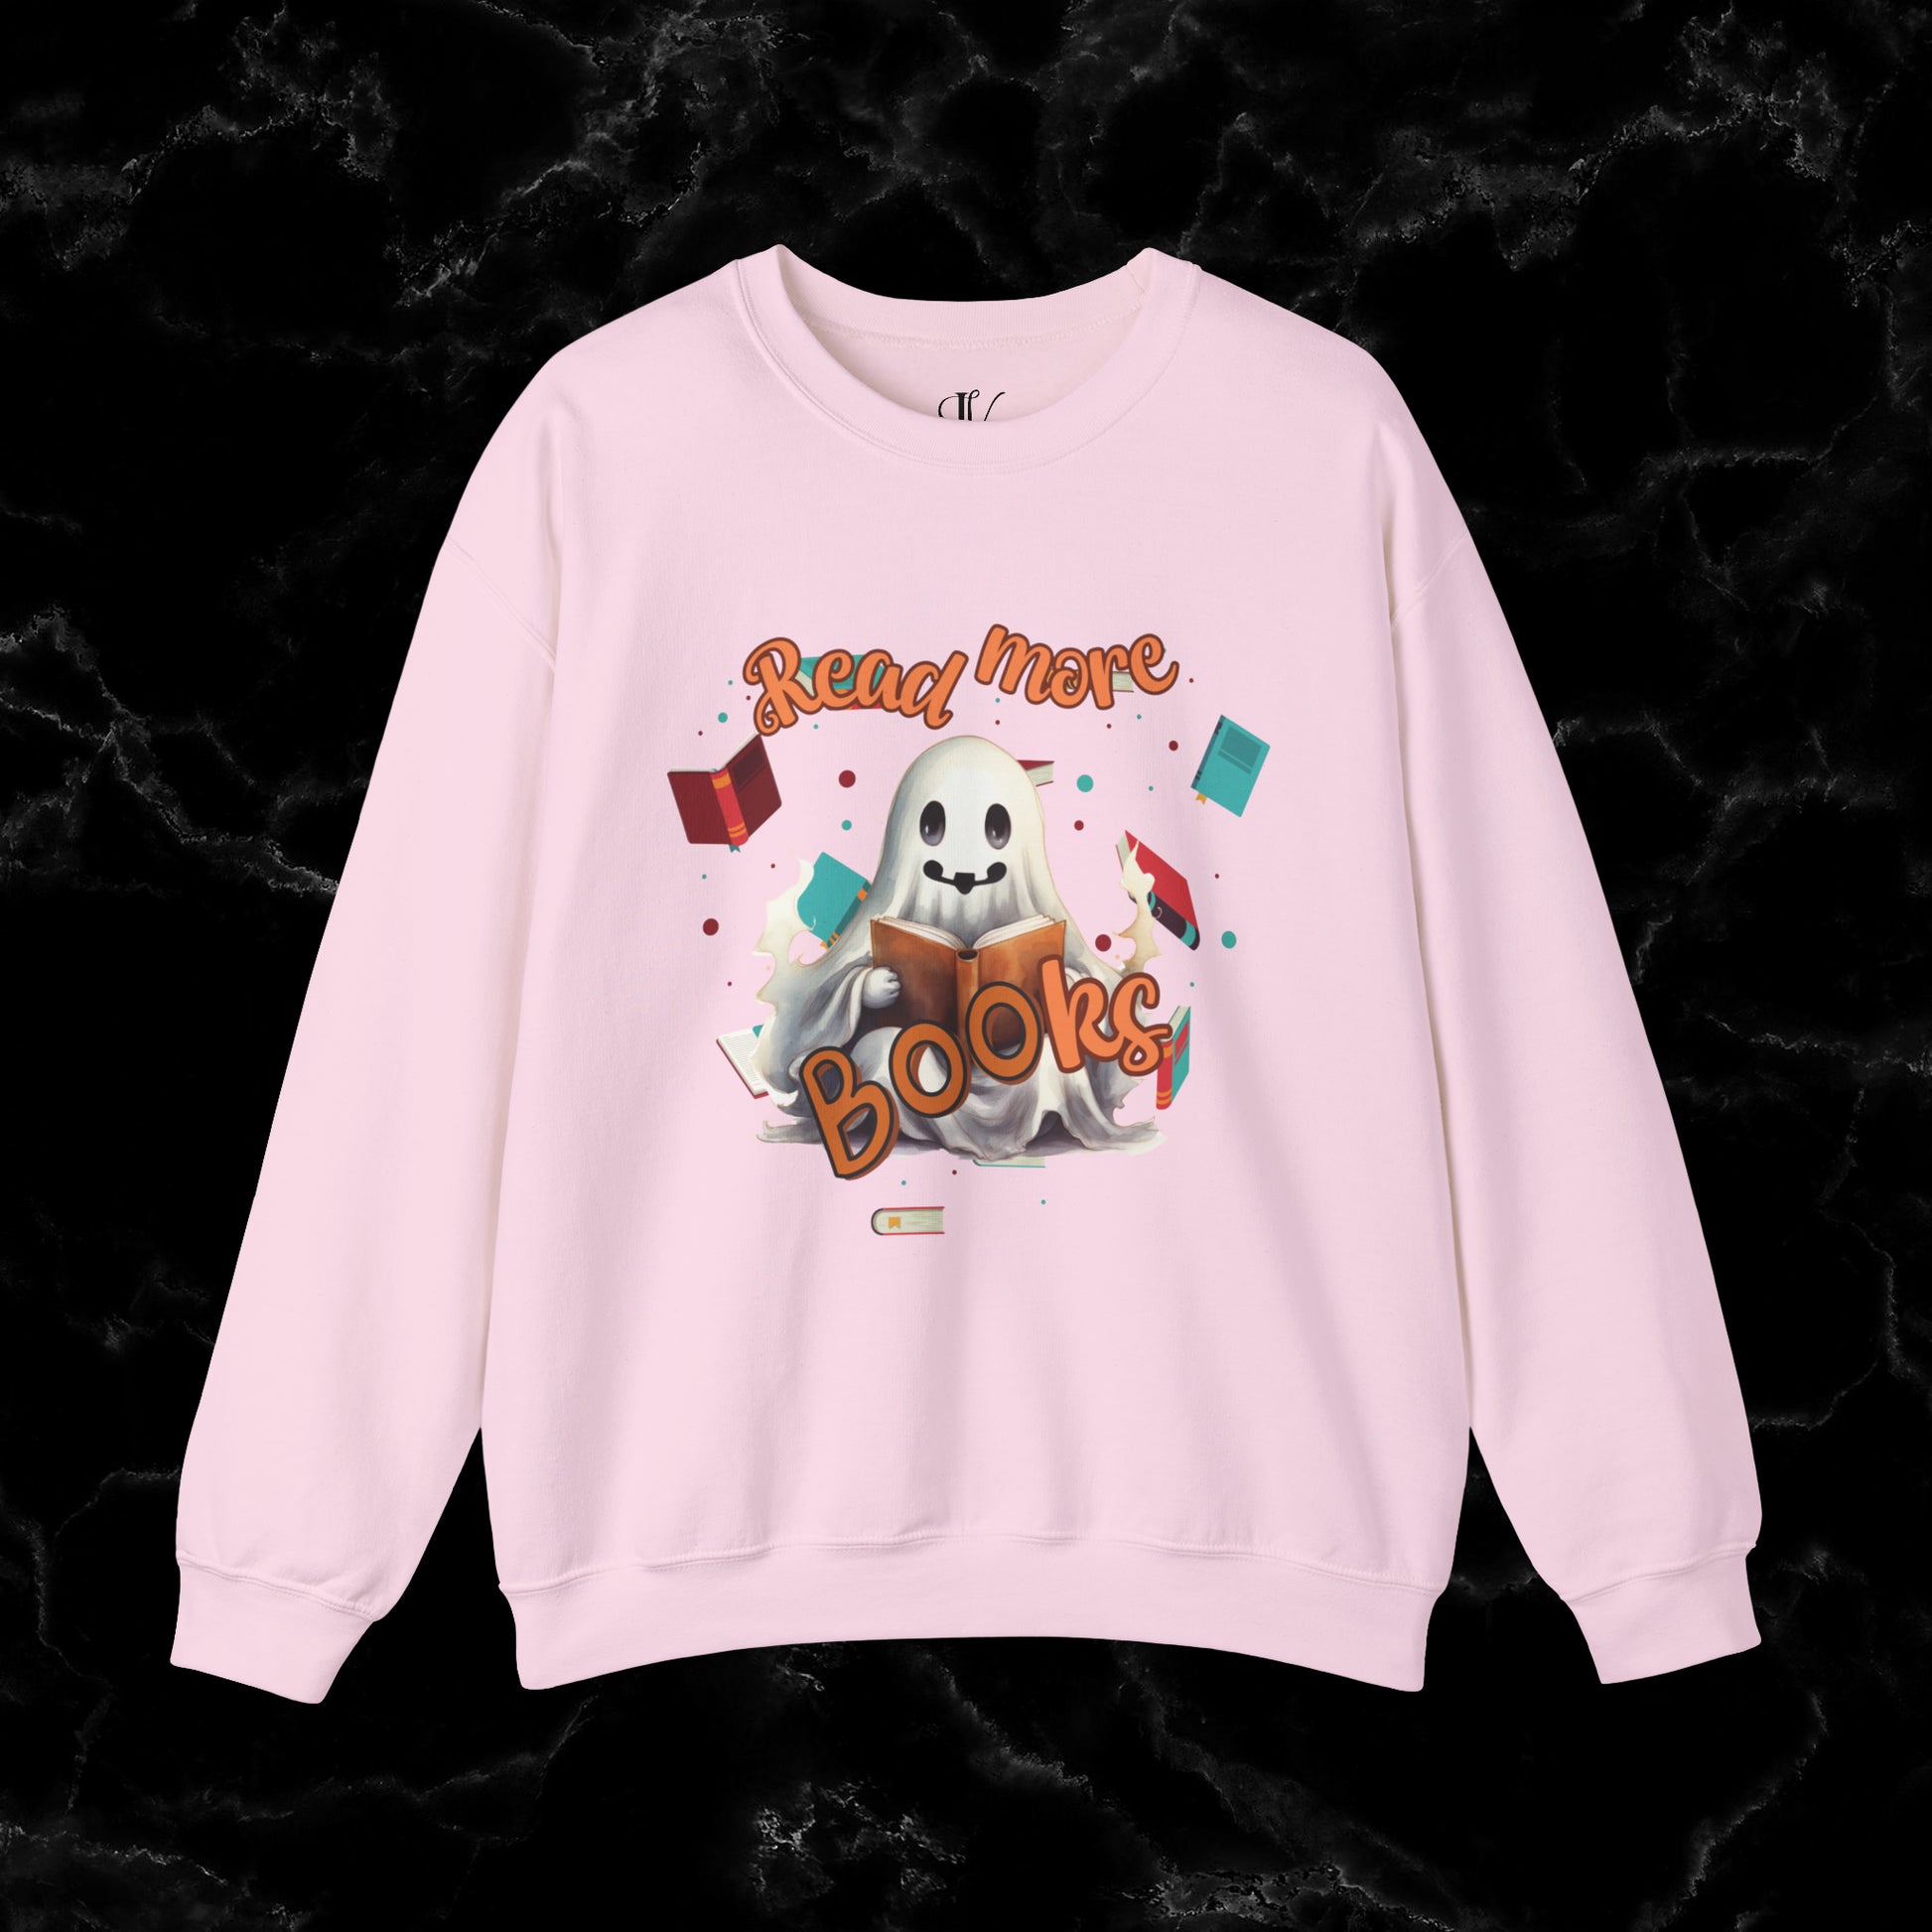 Read More Books Sweatshirt - Book Lover Halloween Sweater for Librarians and Students Sweatshirt S Light Pink 